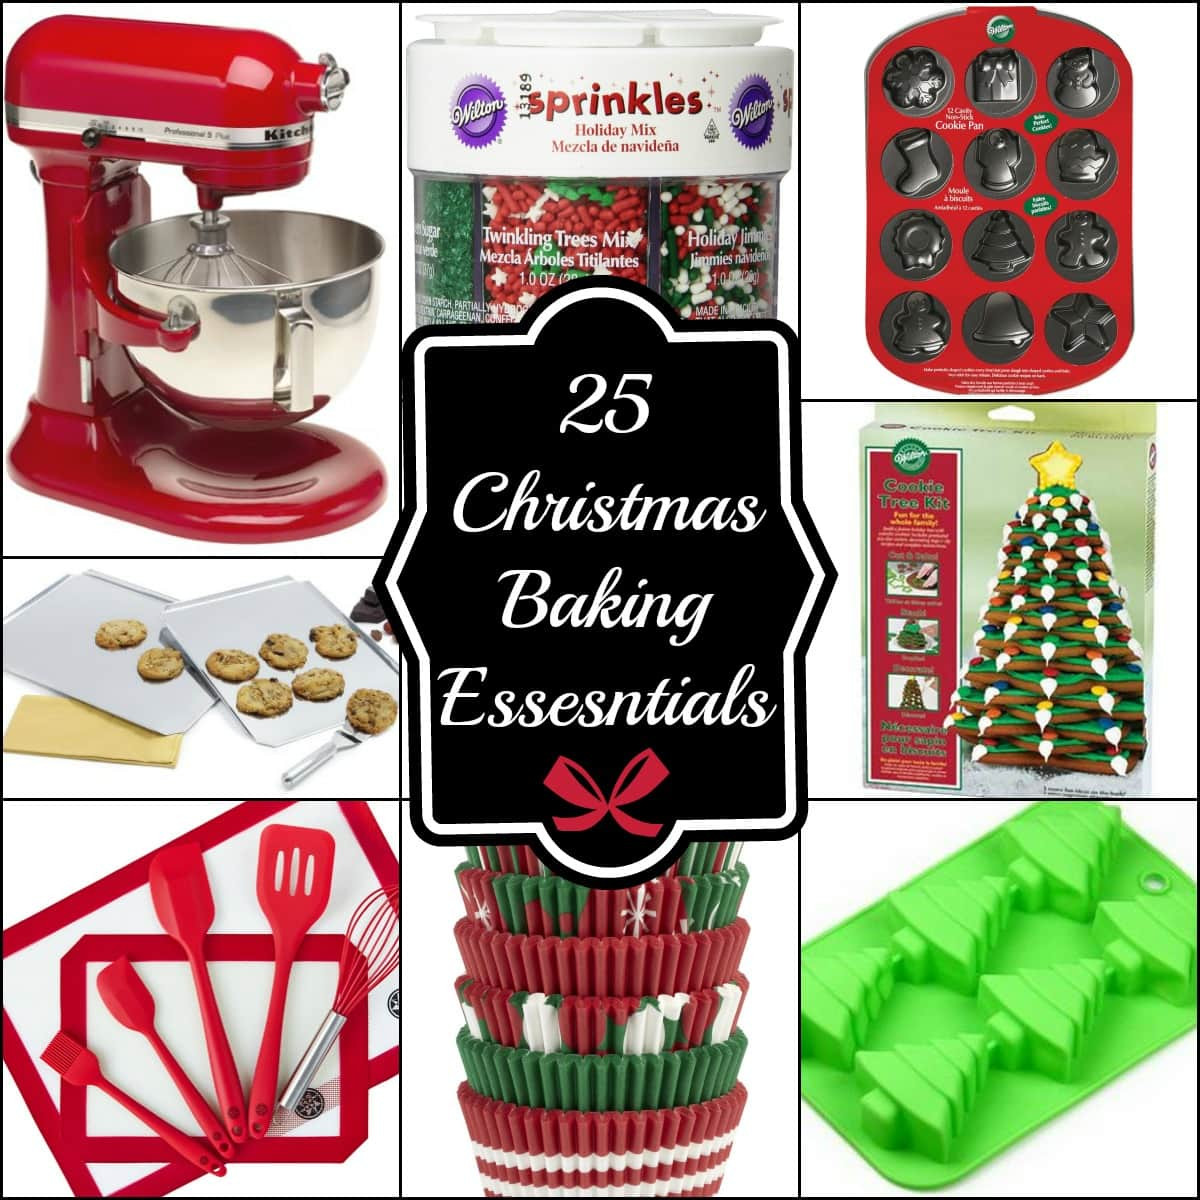 Christmas Baking Gift Ideas
 25 Christmas Baking Essentials and Baking Gift Ideas